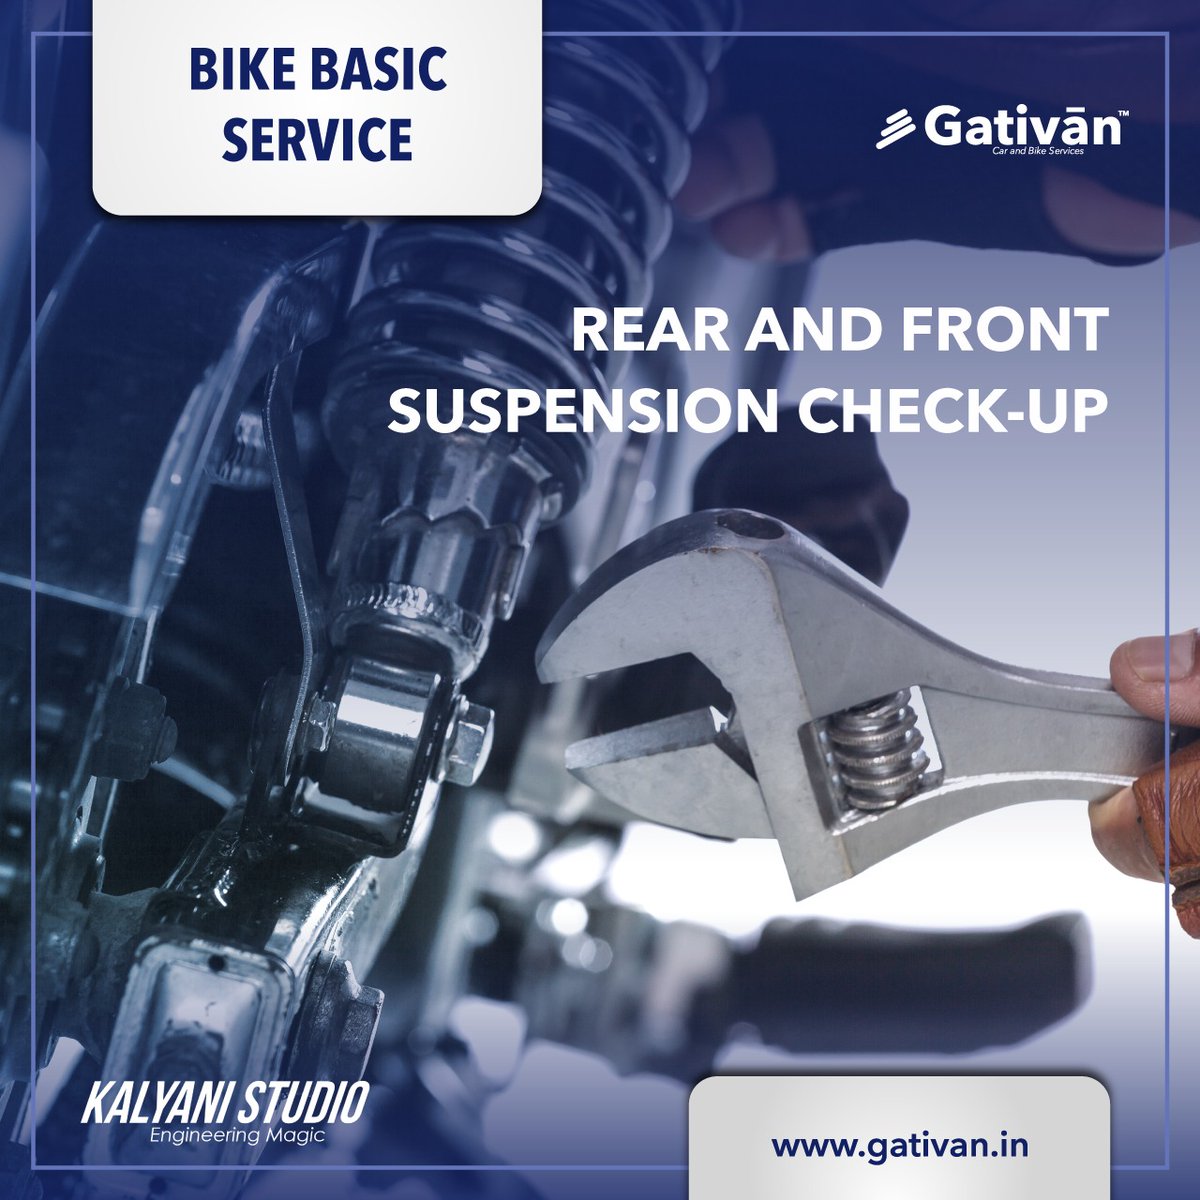 Don't let potholes ruin your ride!
Get your suspension in tiptop shape with Gativan's Rear and Front Suspension Check-Up. 

Visit gativan.in or contact 8263090692 today!  
.
.
.
#Gativan #AutoService #bikeservice #bikesofpune #vehicleservicing #bikebasicservice